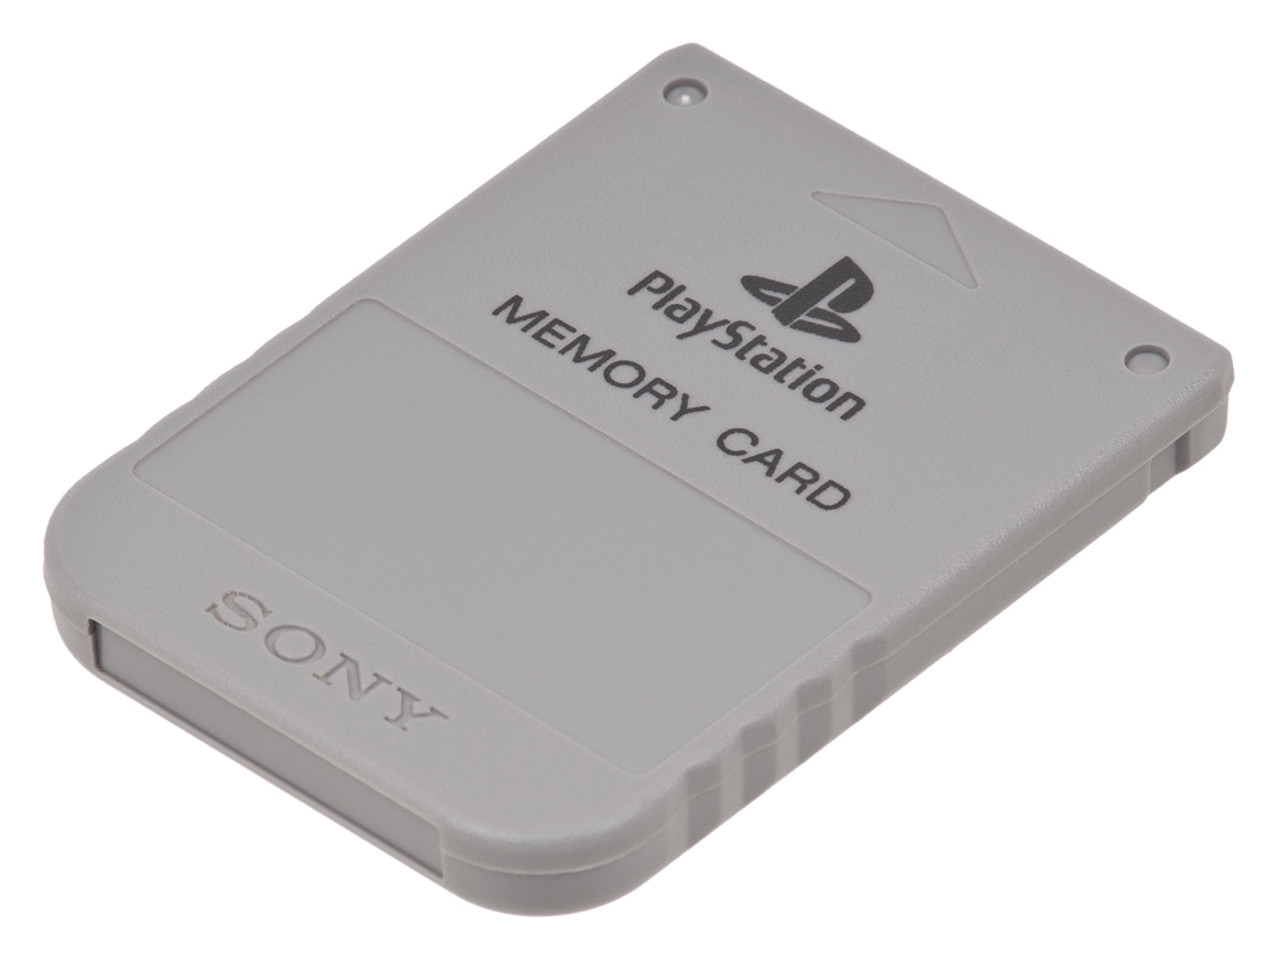 Ps1 memory card in ps2